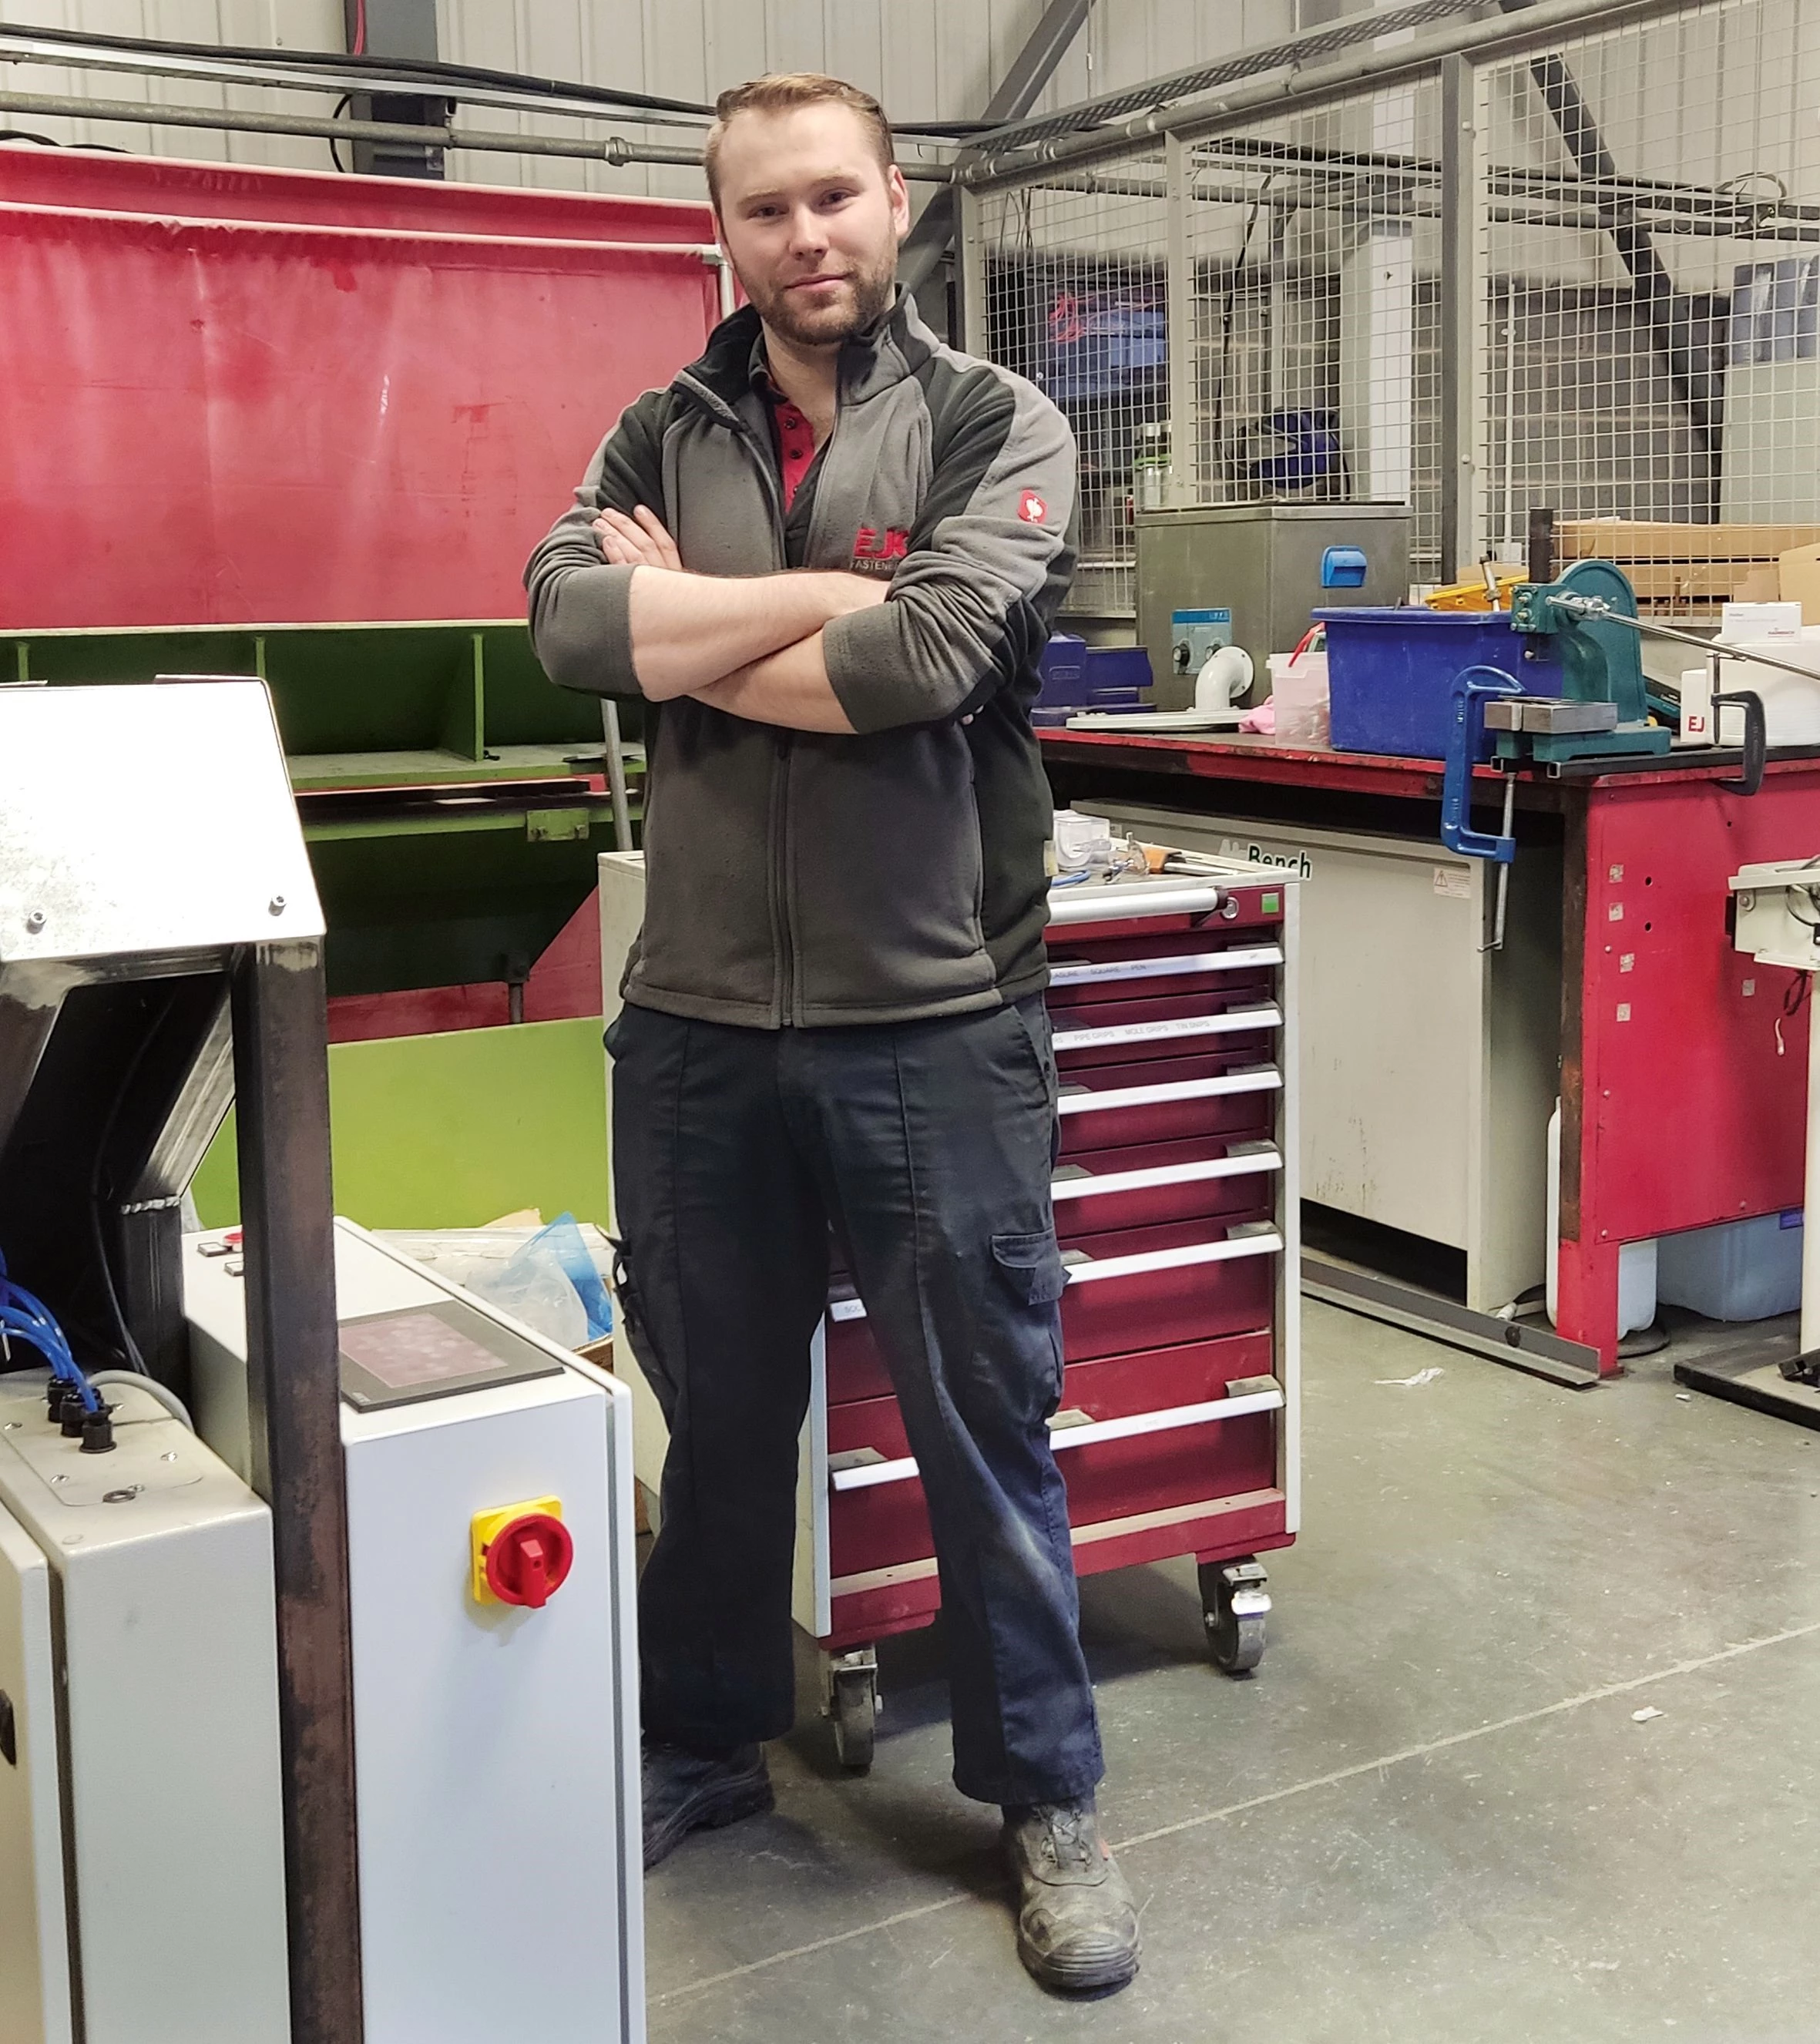 Josh Mozer, engineer at fastening systems EJOT UK, who started his career as an apprentice and has now developed a machine which has lead to more efficiencies in the company’s production process.